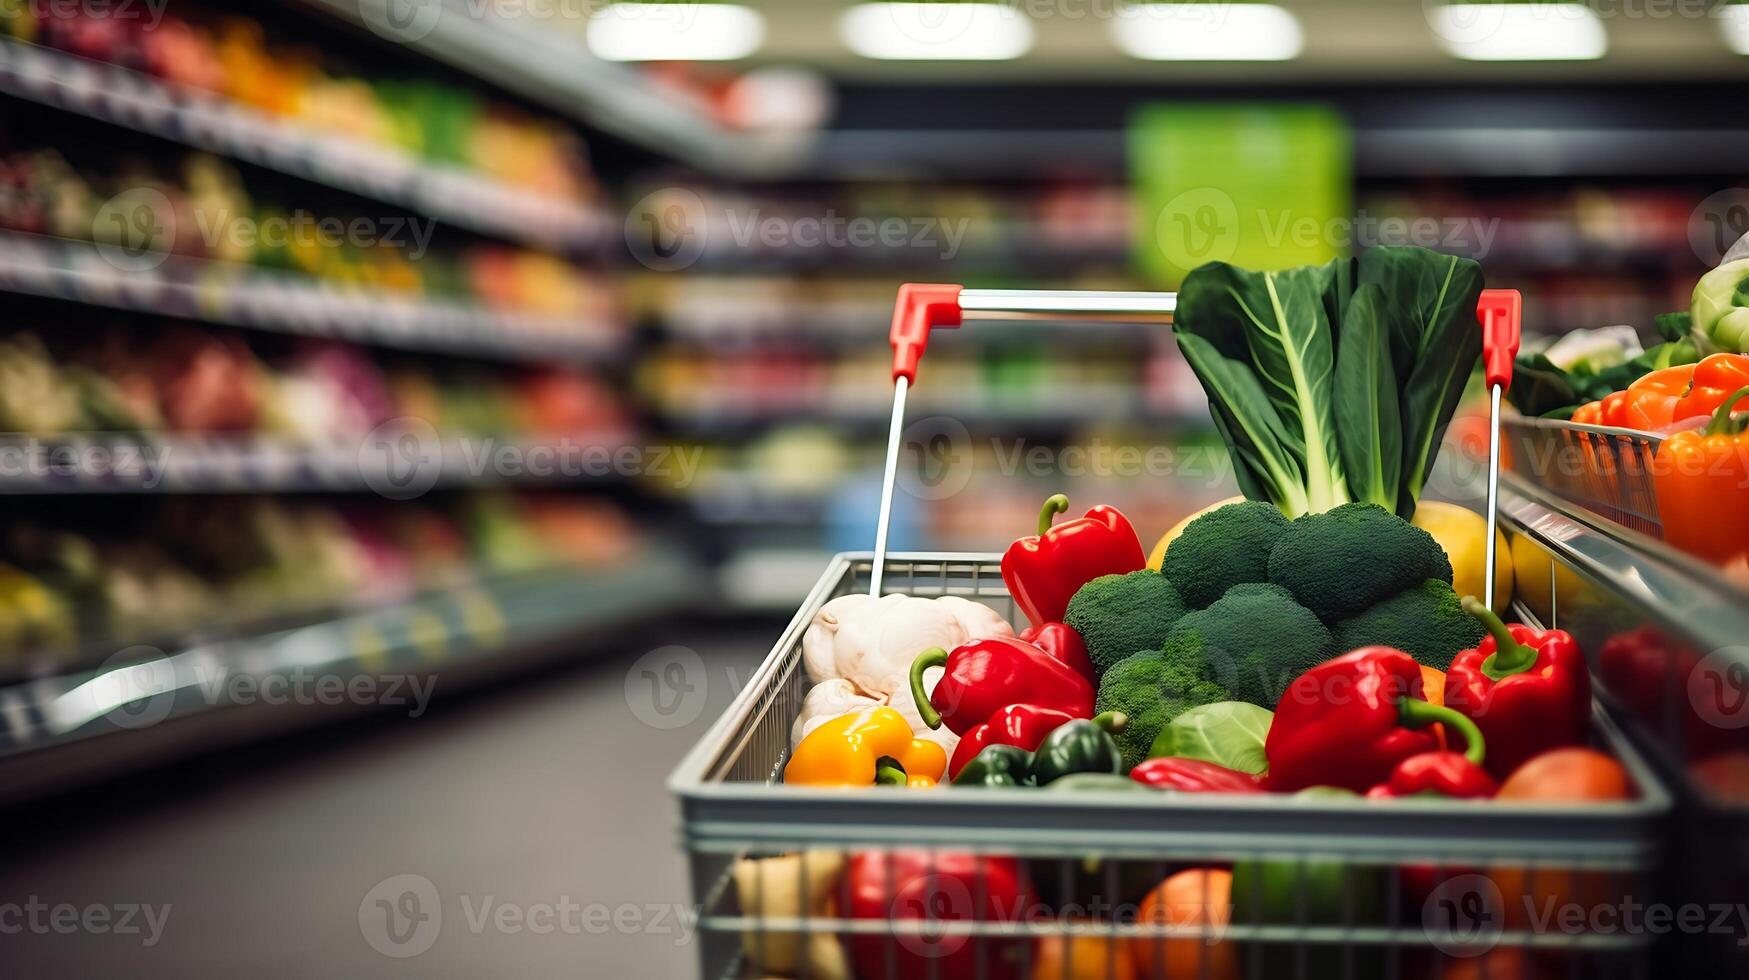 Shopping cart full of fresh vegetables in supermarket, closeup view photo